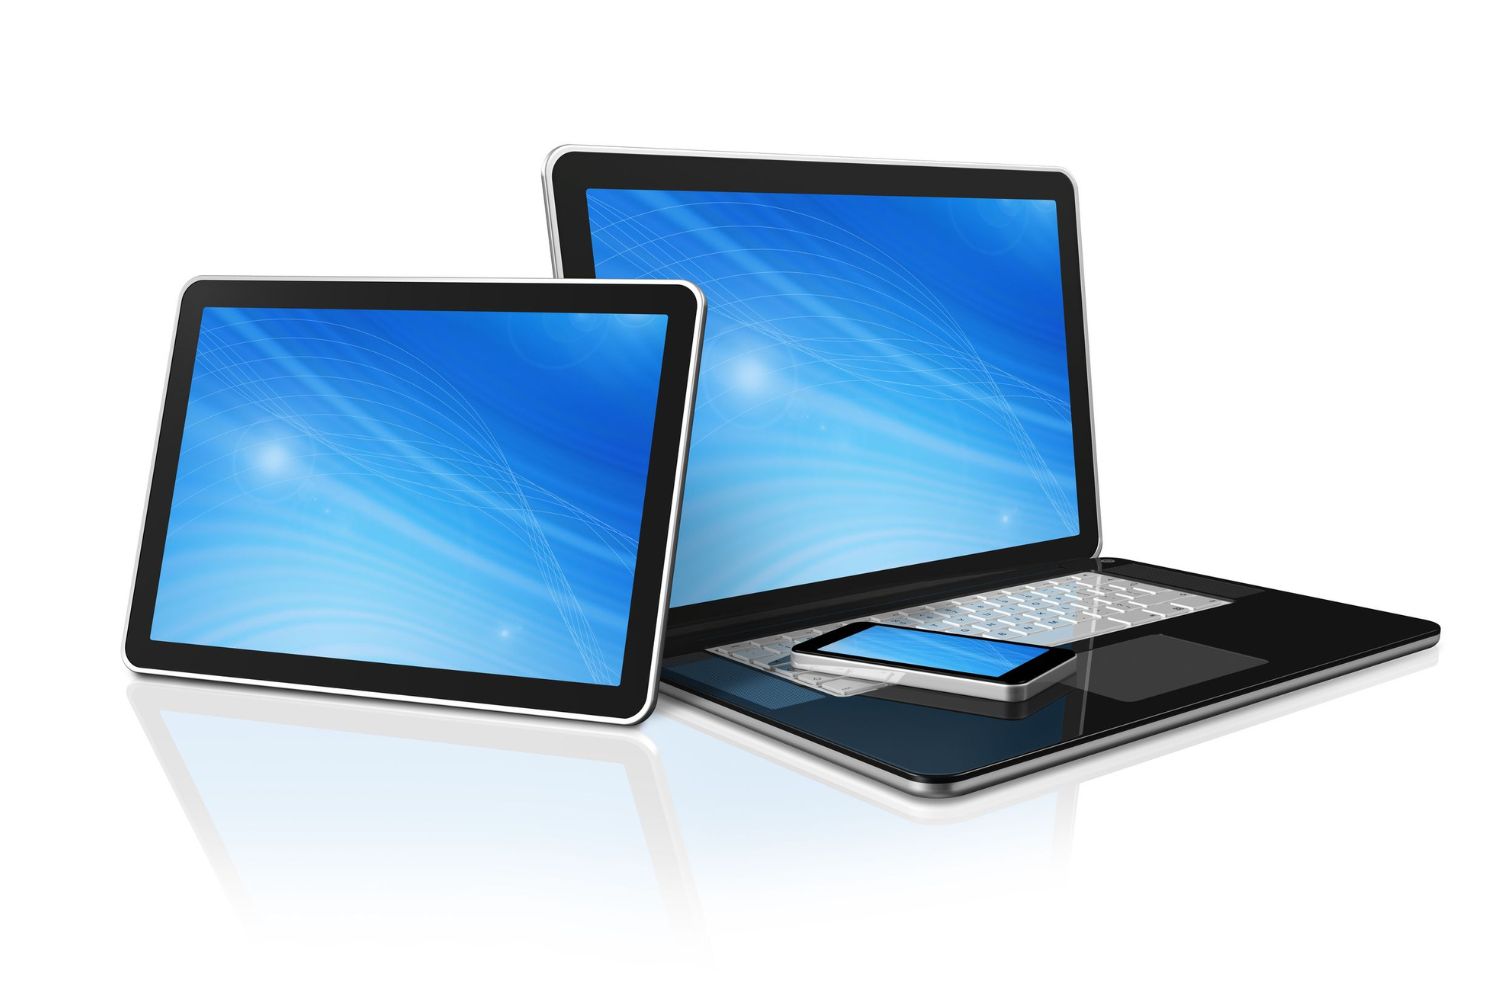 laptop-or-tablet-which-is-better